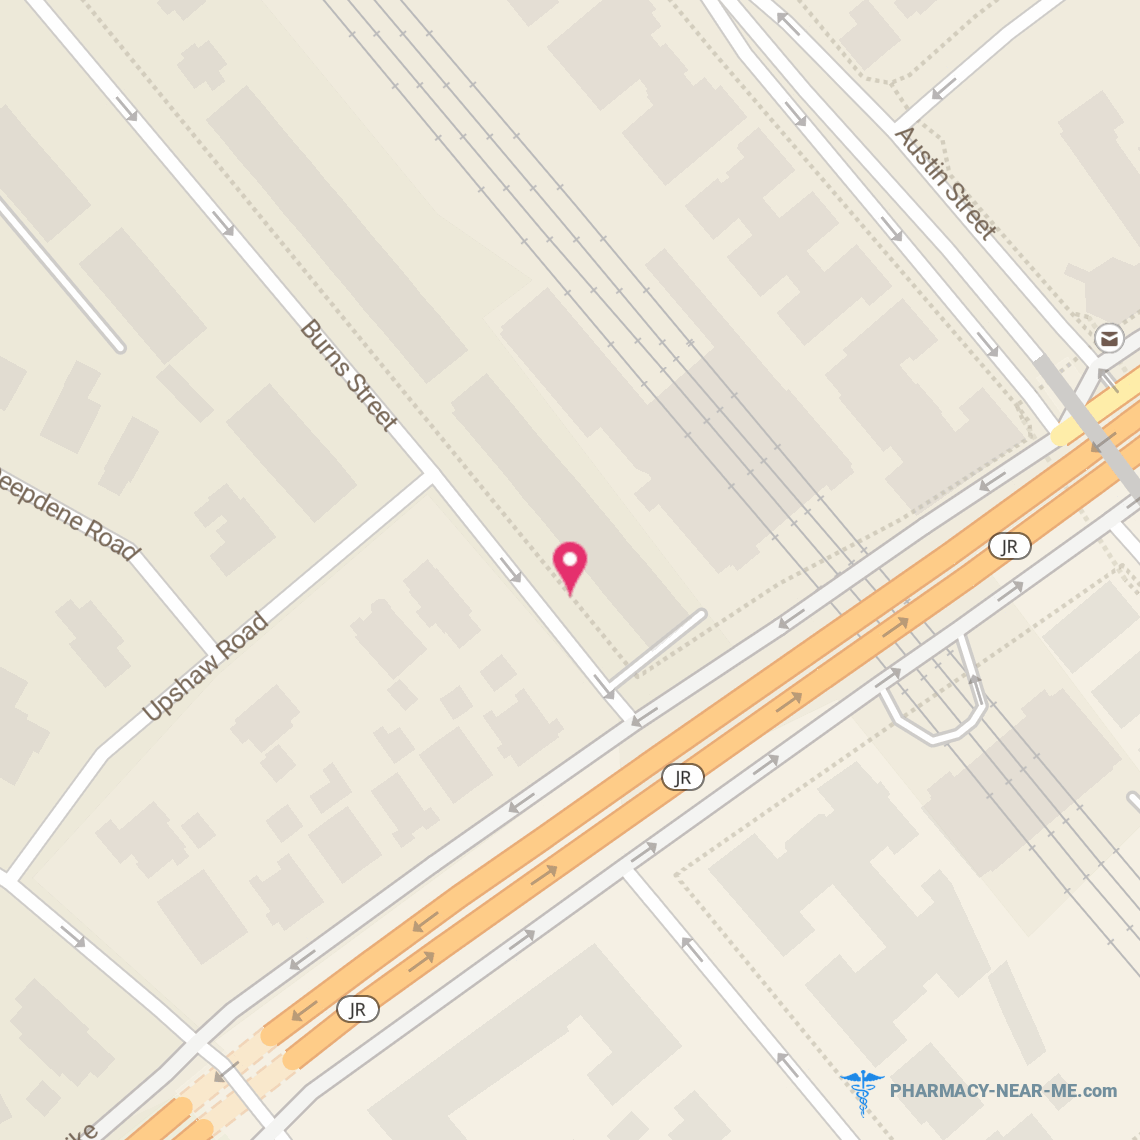 MERRICK RX INC - Pharmacy Hours, Phone, Reviews & Information: 68-04 Burns Street, Queens, New York 11375, United States